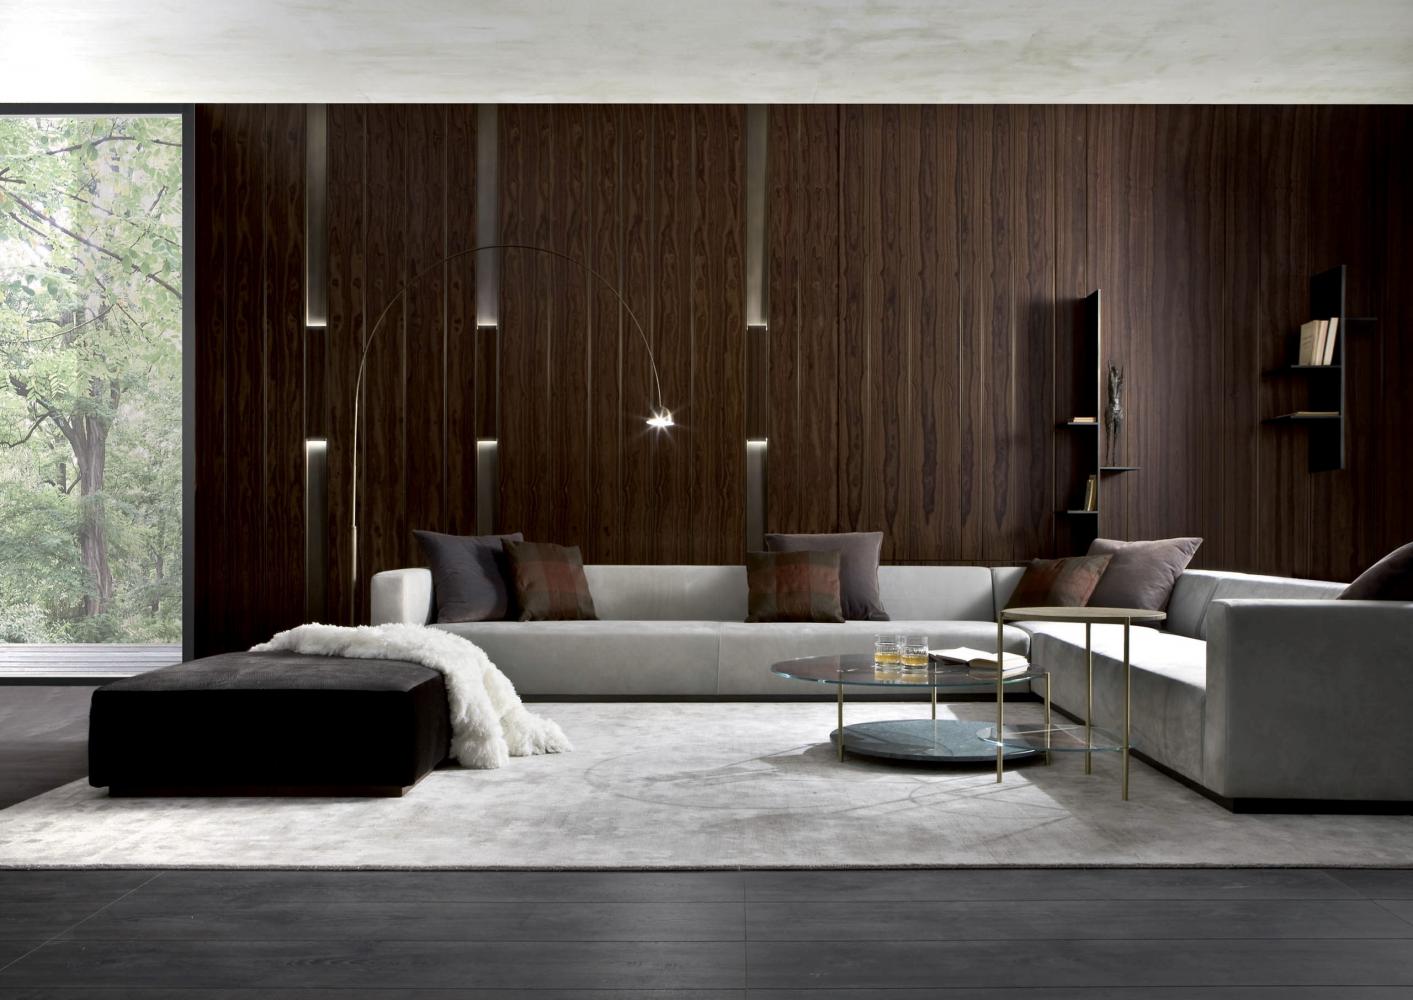 laurameroni 3d wall panels boiserie in wood, metal or fabric for luxury modern interior design